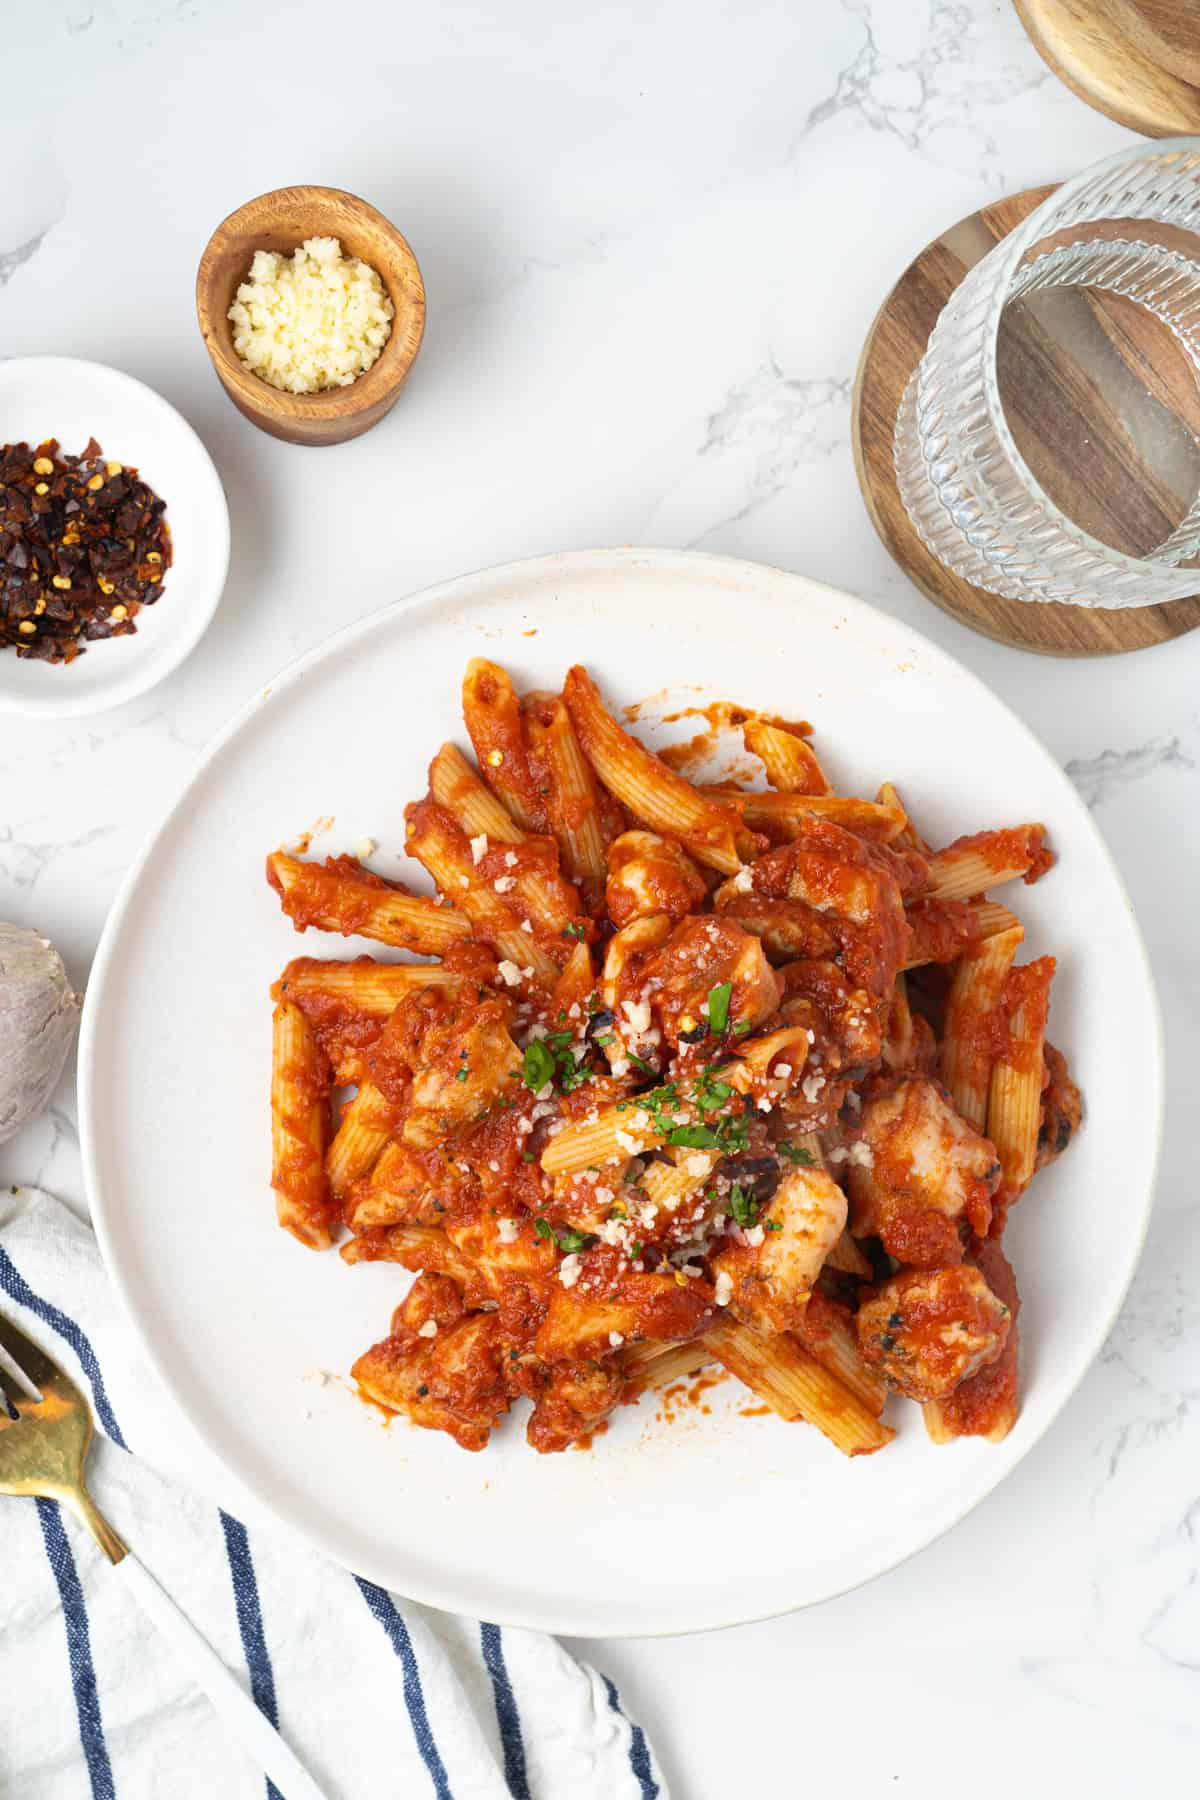 Chicken arrabiata with penne with cheese and red pepper flakes.